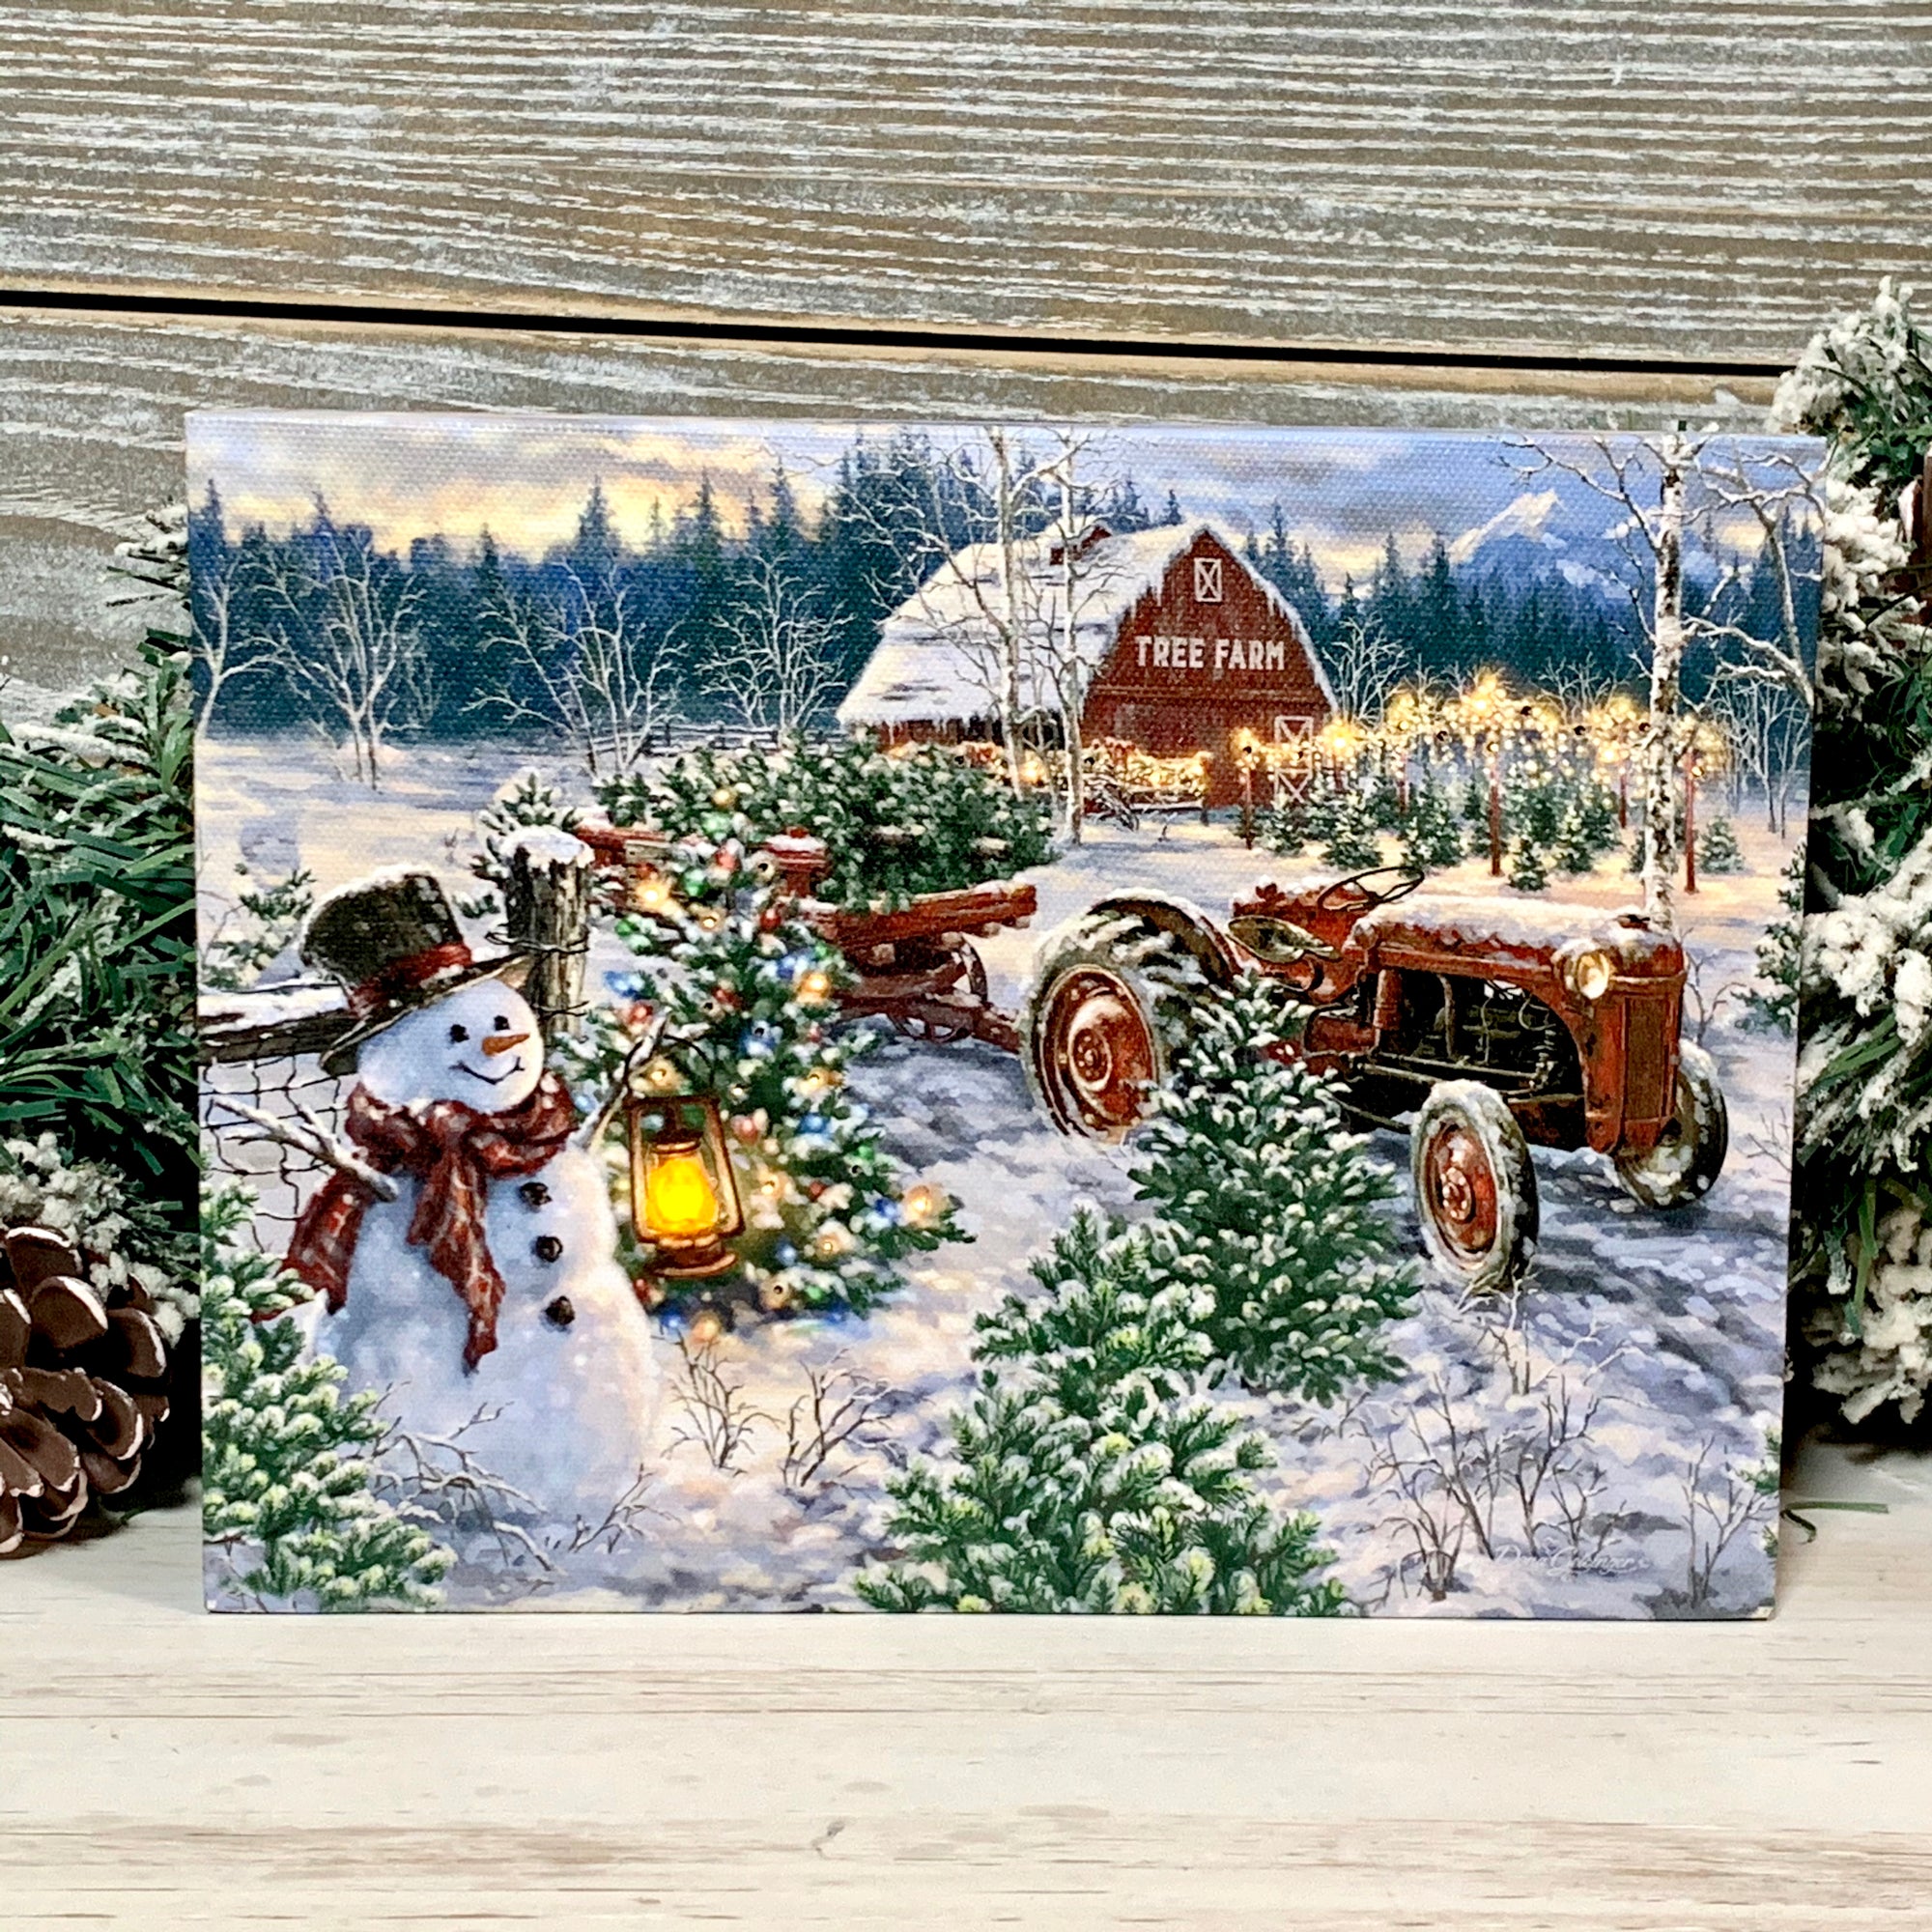 a delightful snowman, adorned in a festive scarf and top hat, standing amidst towering pine trees, holding a glowing lantern that illuminates the snowy landscape.  A rustic red tractor, pulling a trailer filled to the brim with freshly cut trees, adds a touch of whimsy to the scene. The charming barn in the distance, surrounded by trees aglow with sparkling lights, completes the idyllic winter wonderland.